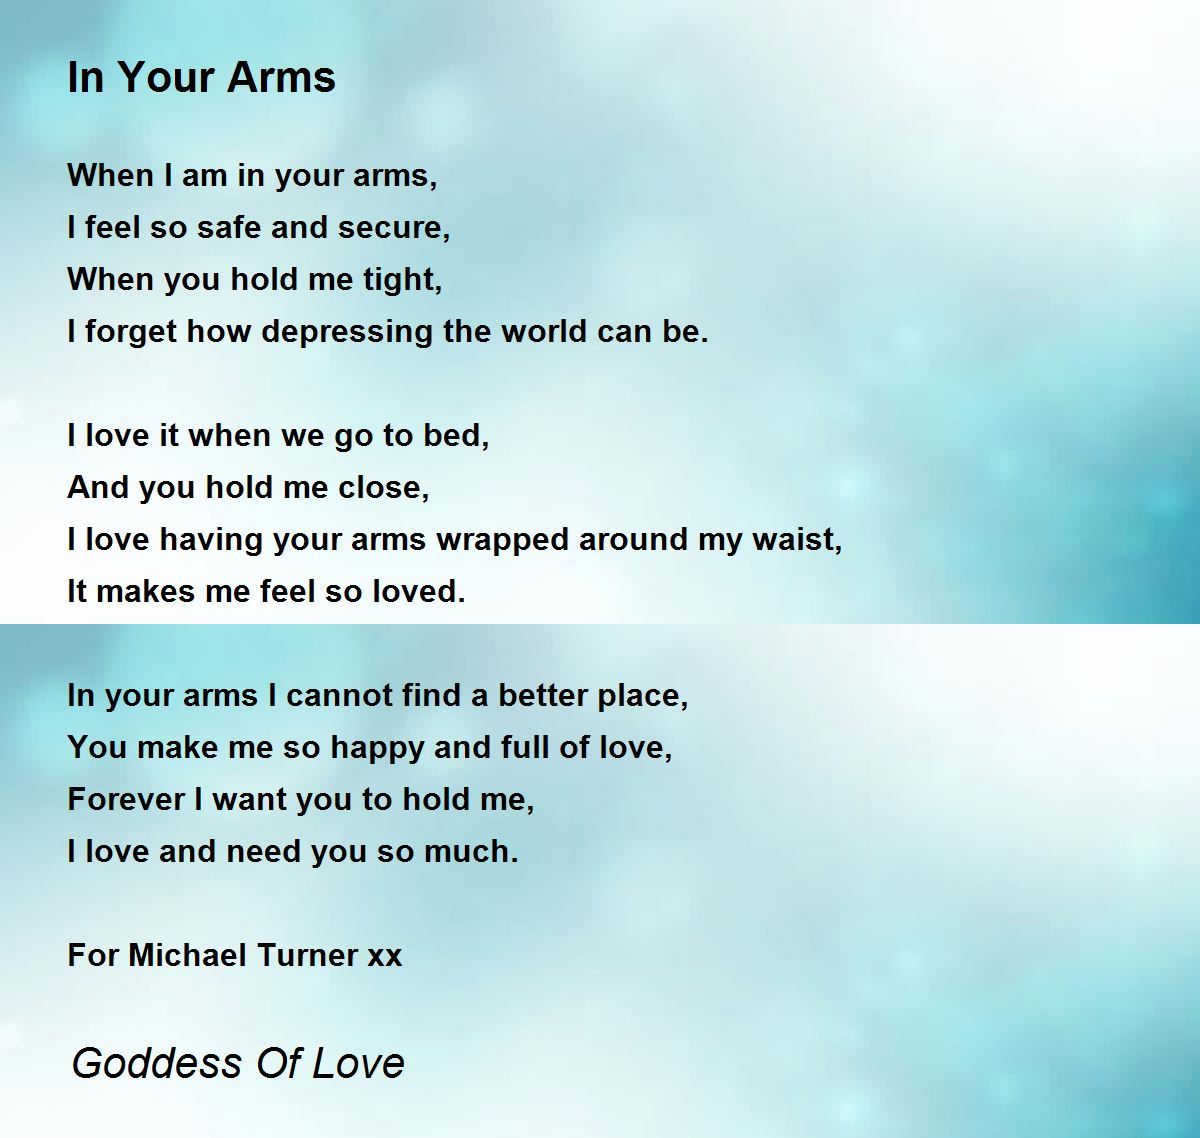 In Your Arms - In Your Arms Poem by Goddess Of Love